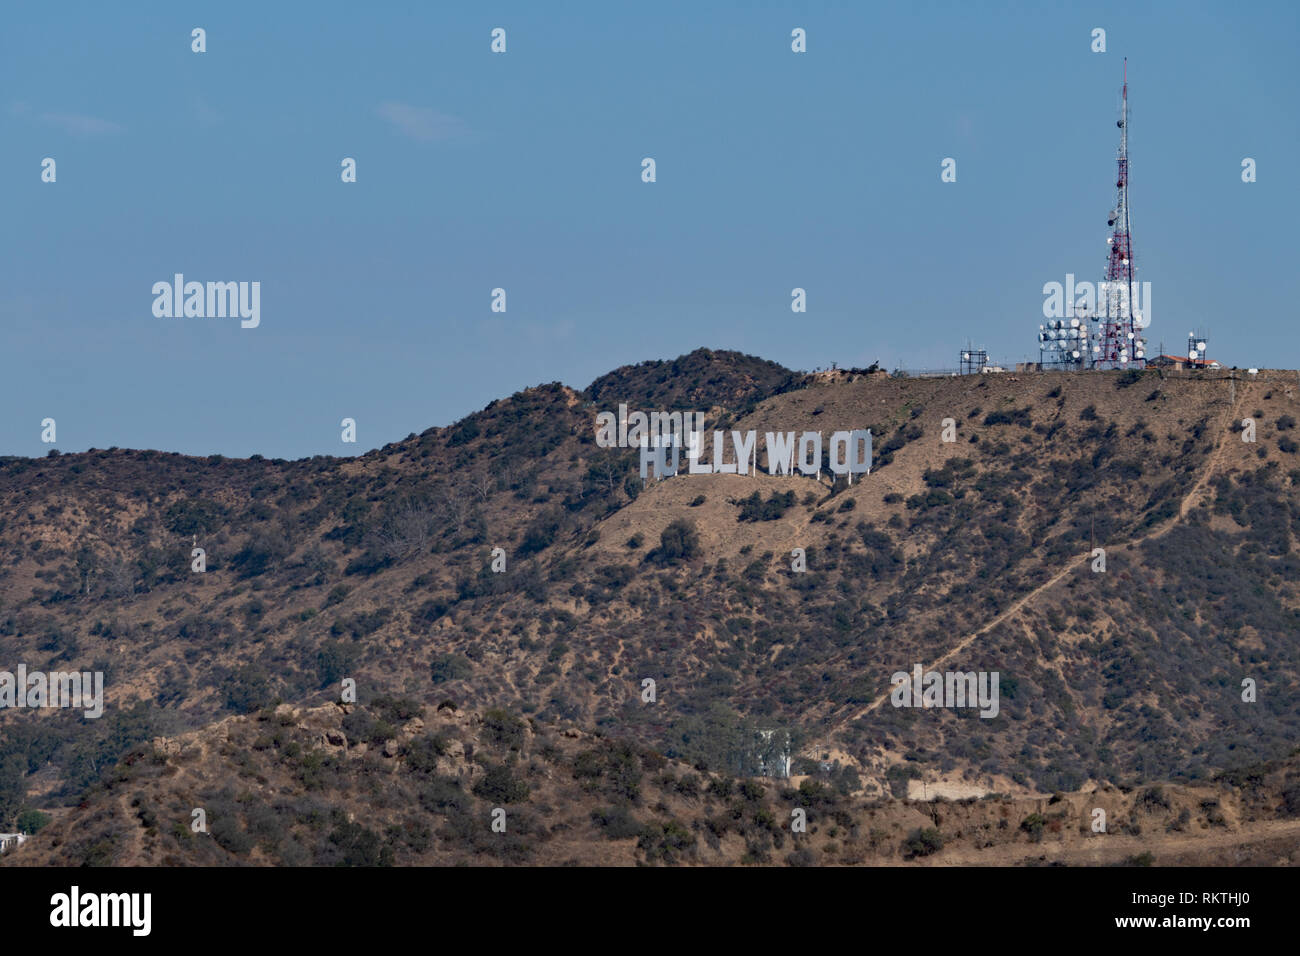 Hollywood Sign Tourist Spot On The Hills Around Los Angeles